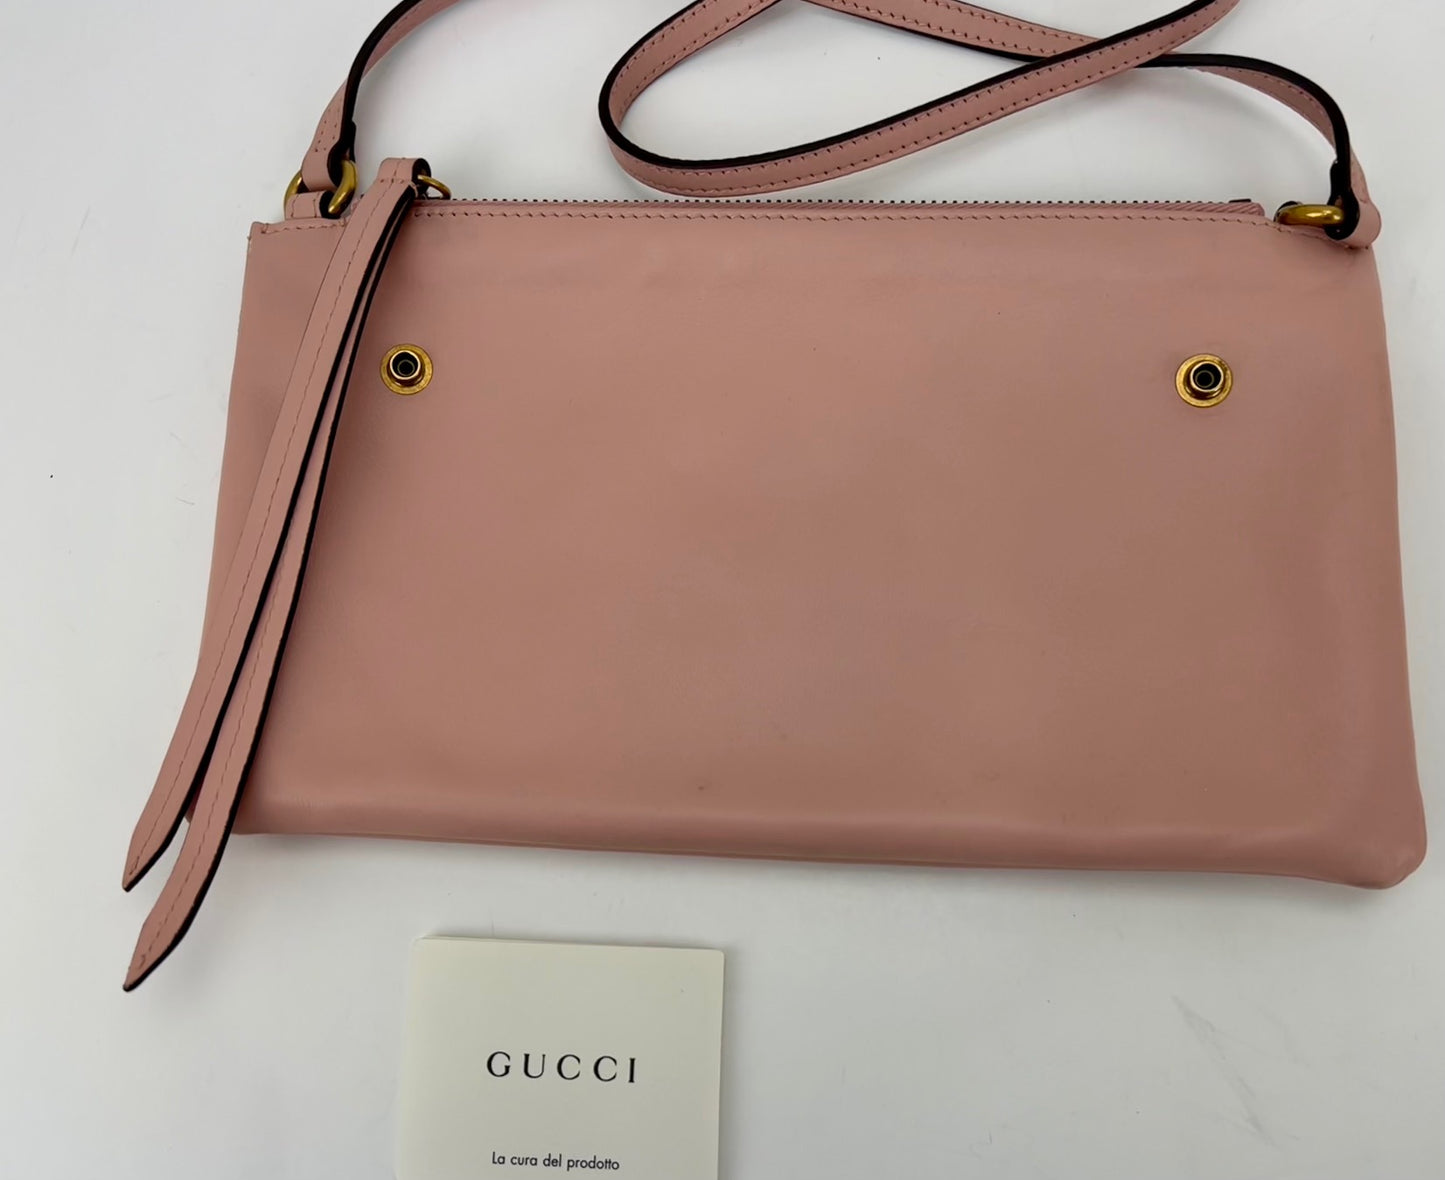 Preloved Gucci GG Marmont Flap Pink Quilted Leather Small Shoulder Bag –  KimmieBBags LLC